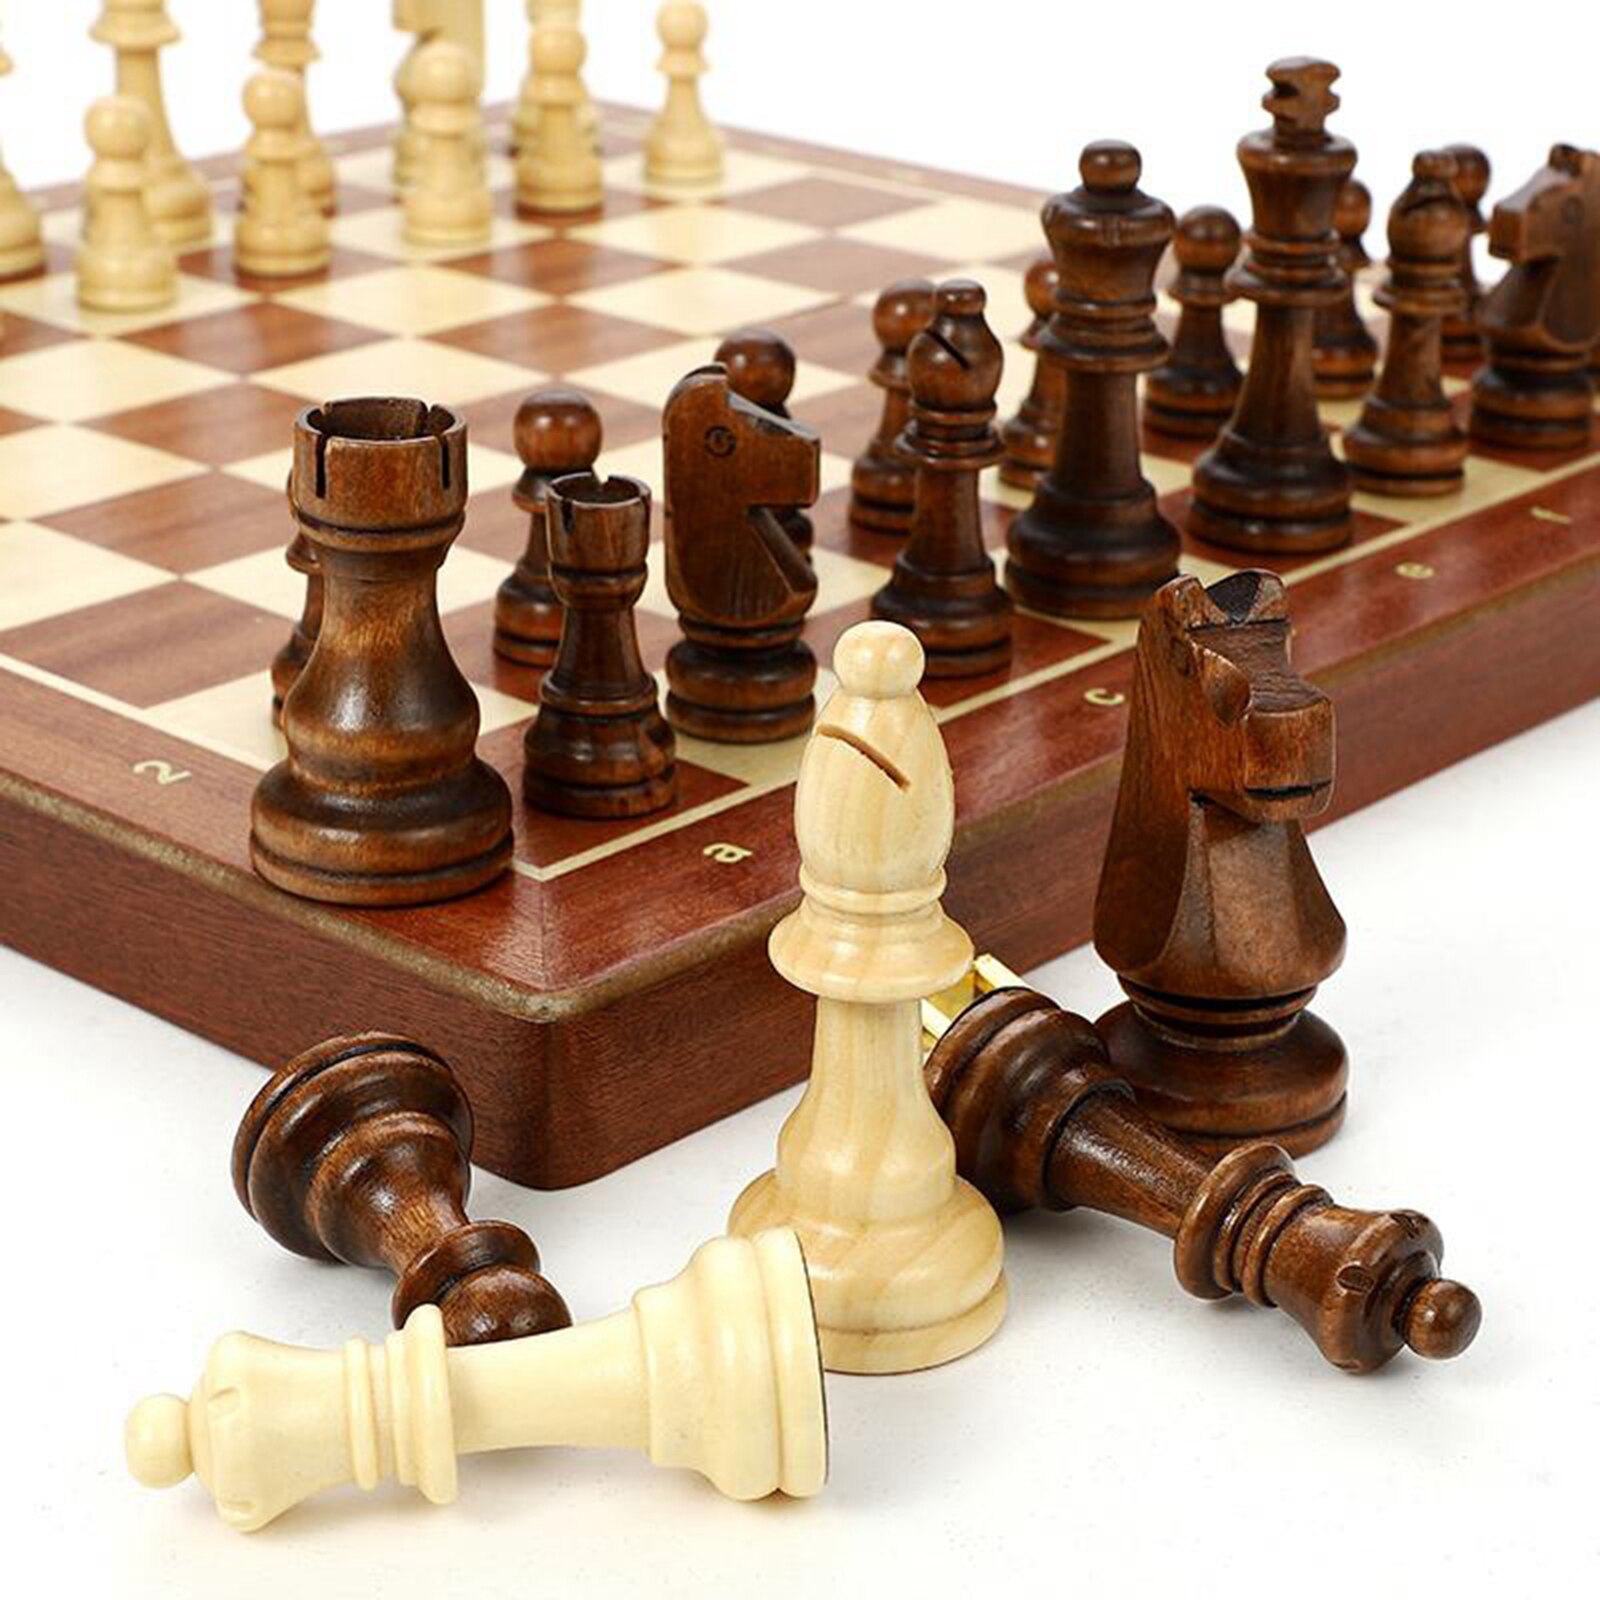 Large Chess Wooden Set Rosewood Folding Chessboard Pieces Wood Board